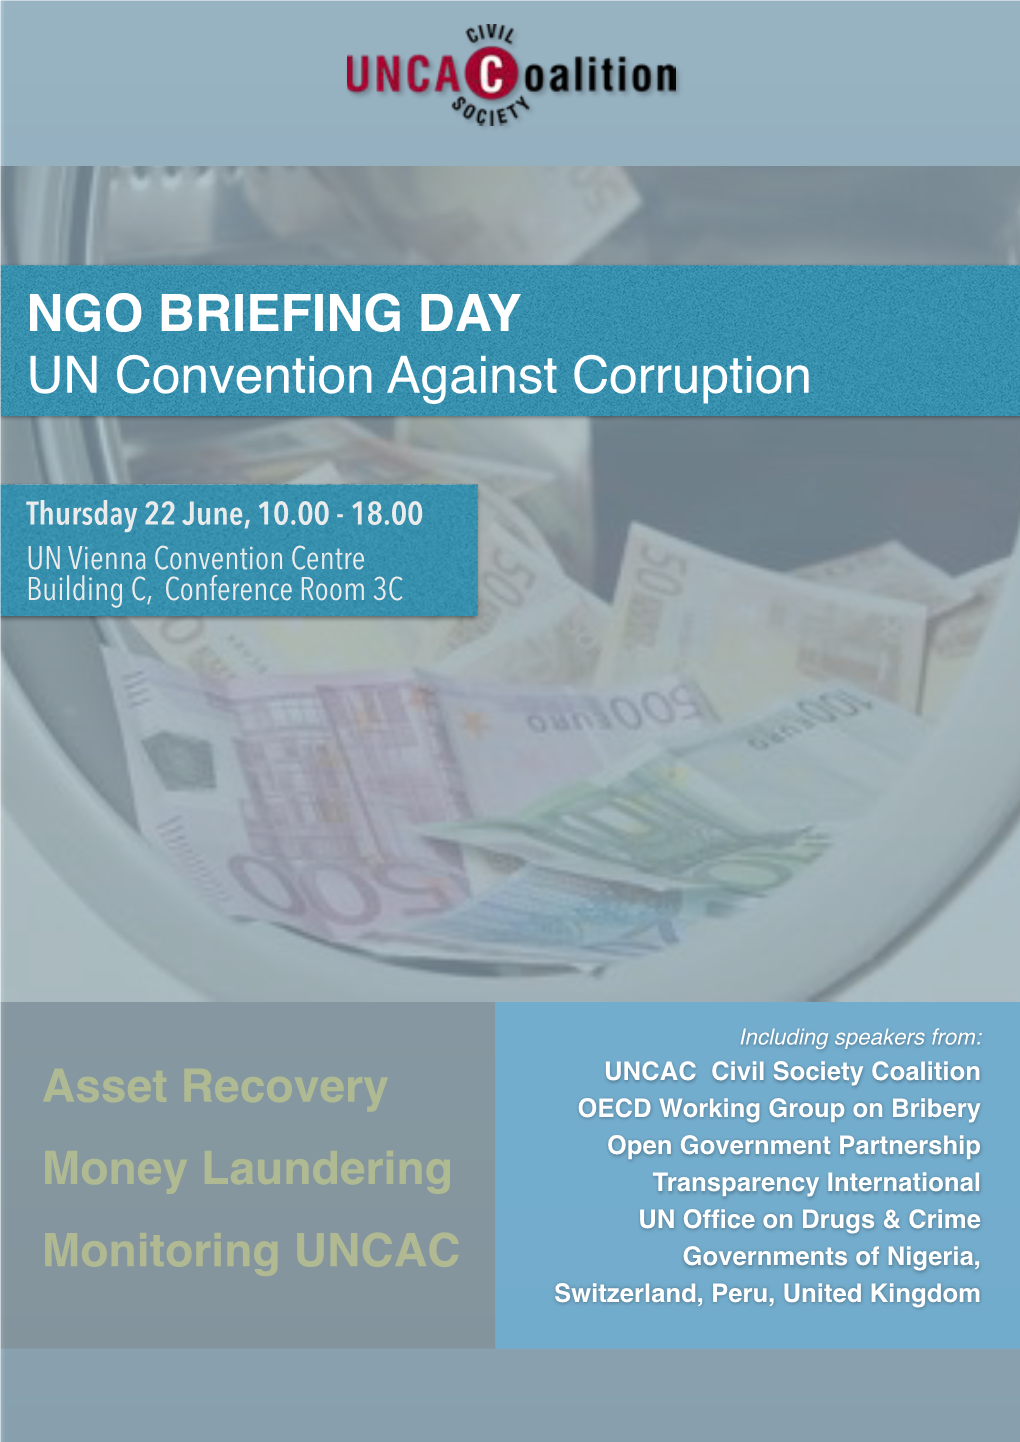 NGO BRIEFING DAY UN Convention Against Corruption